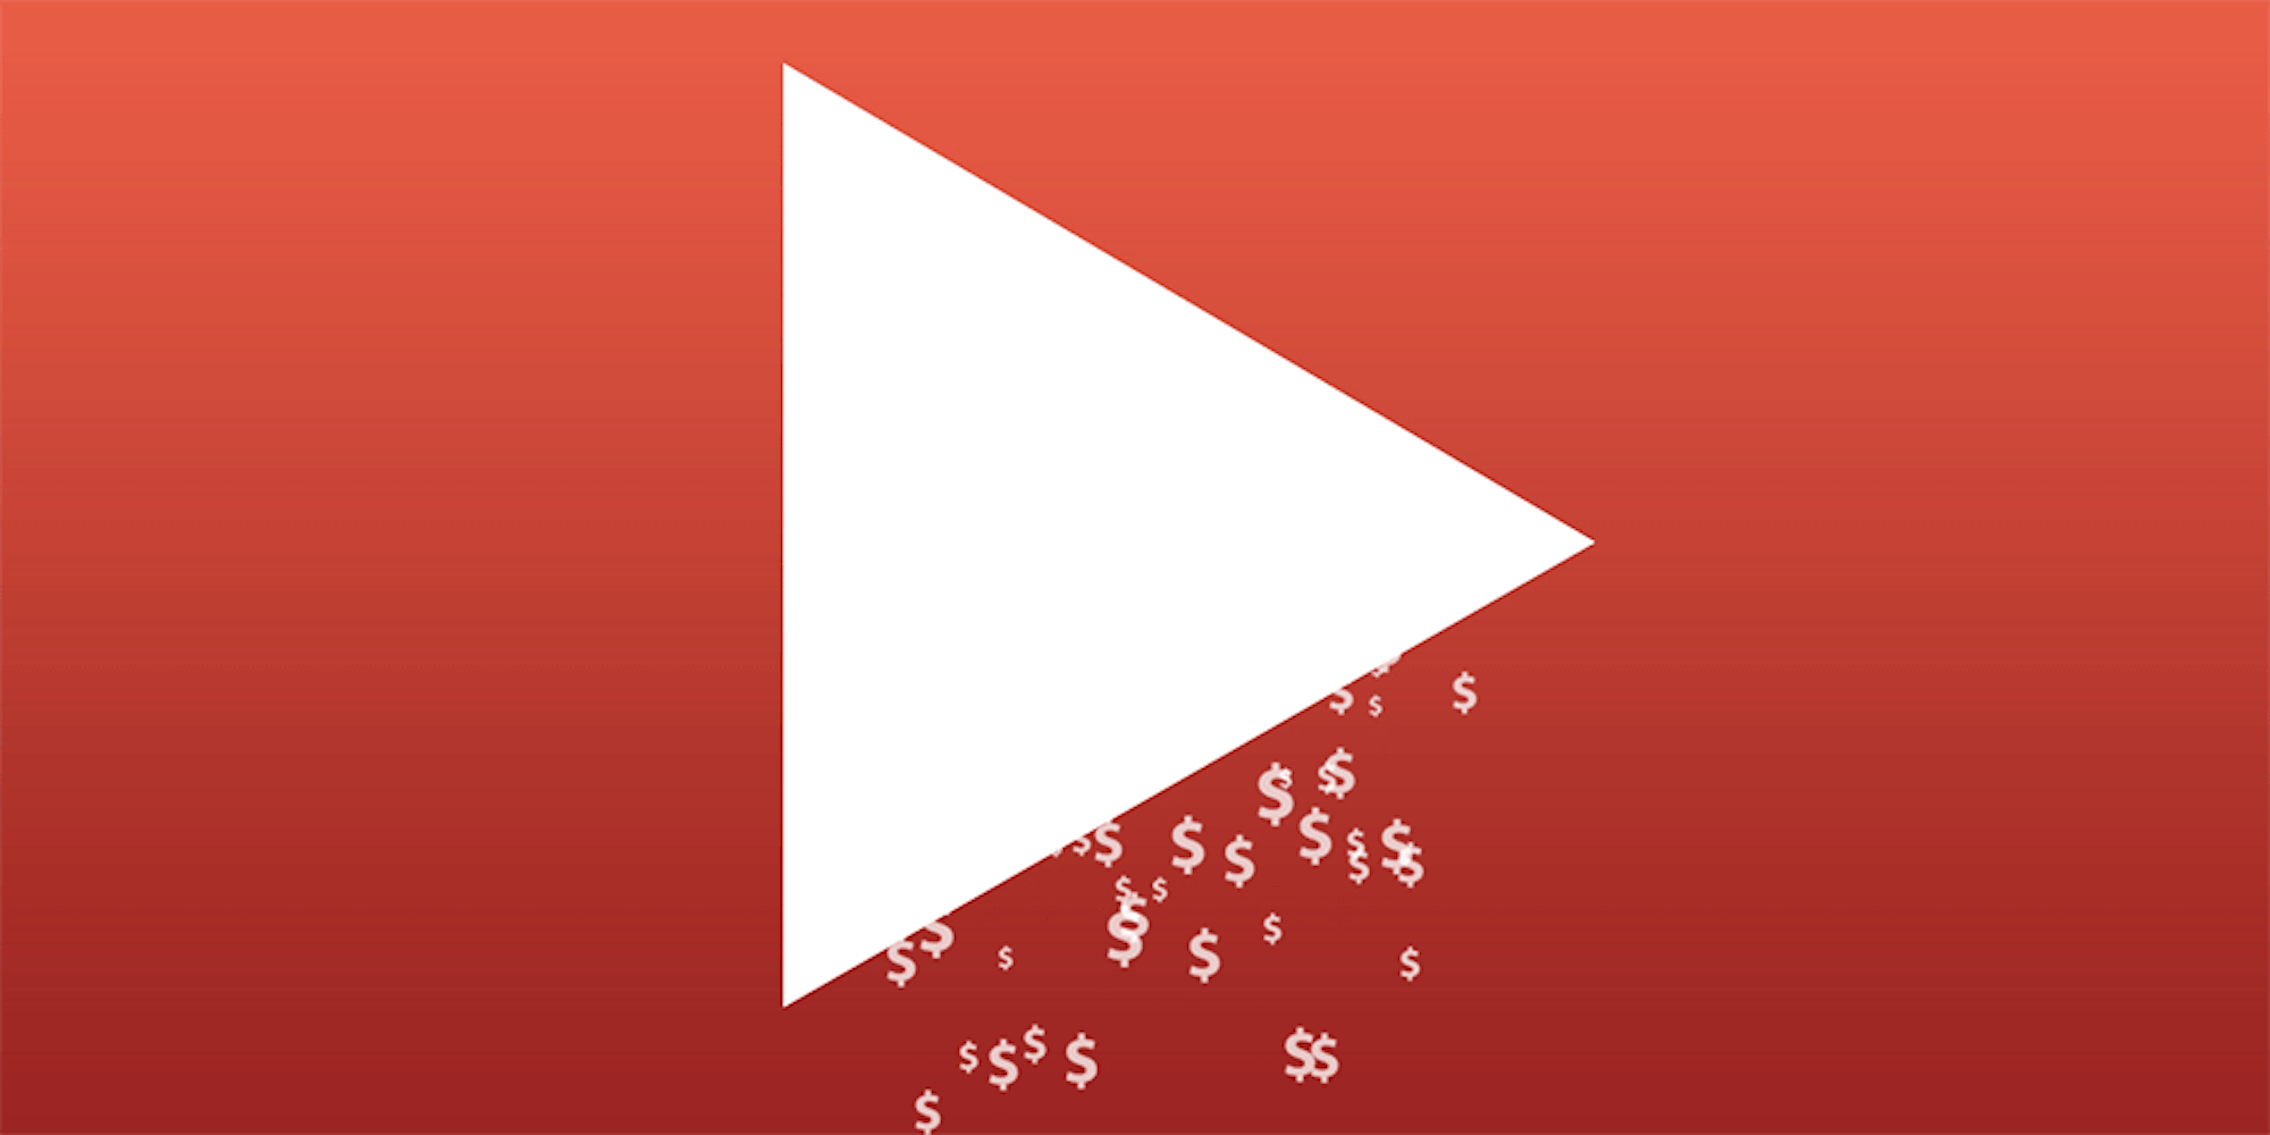 YouTube play button logo dripping dollar signs